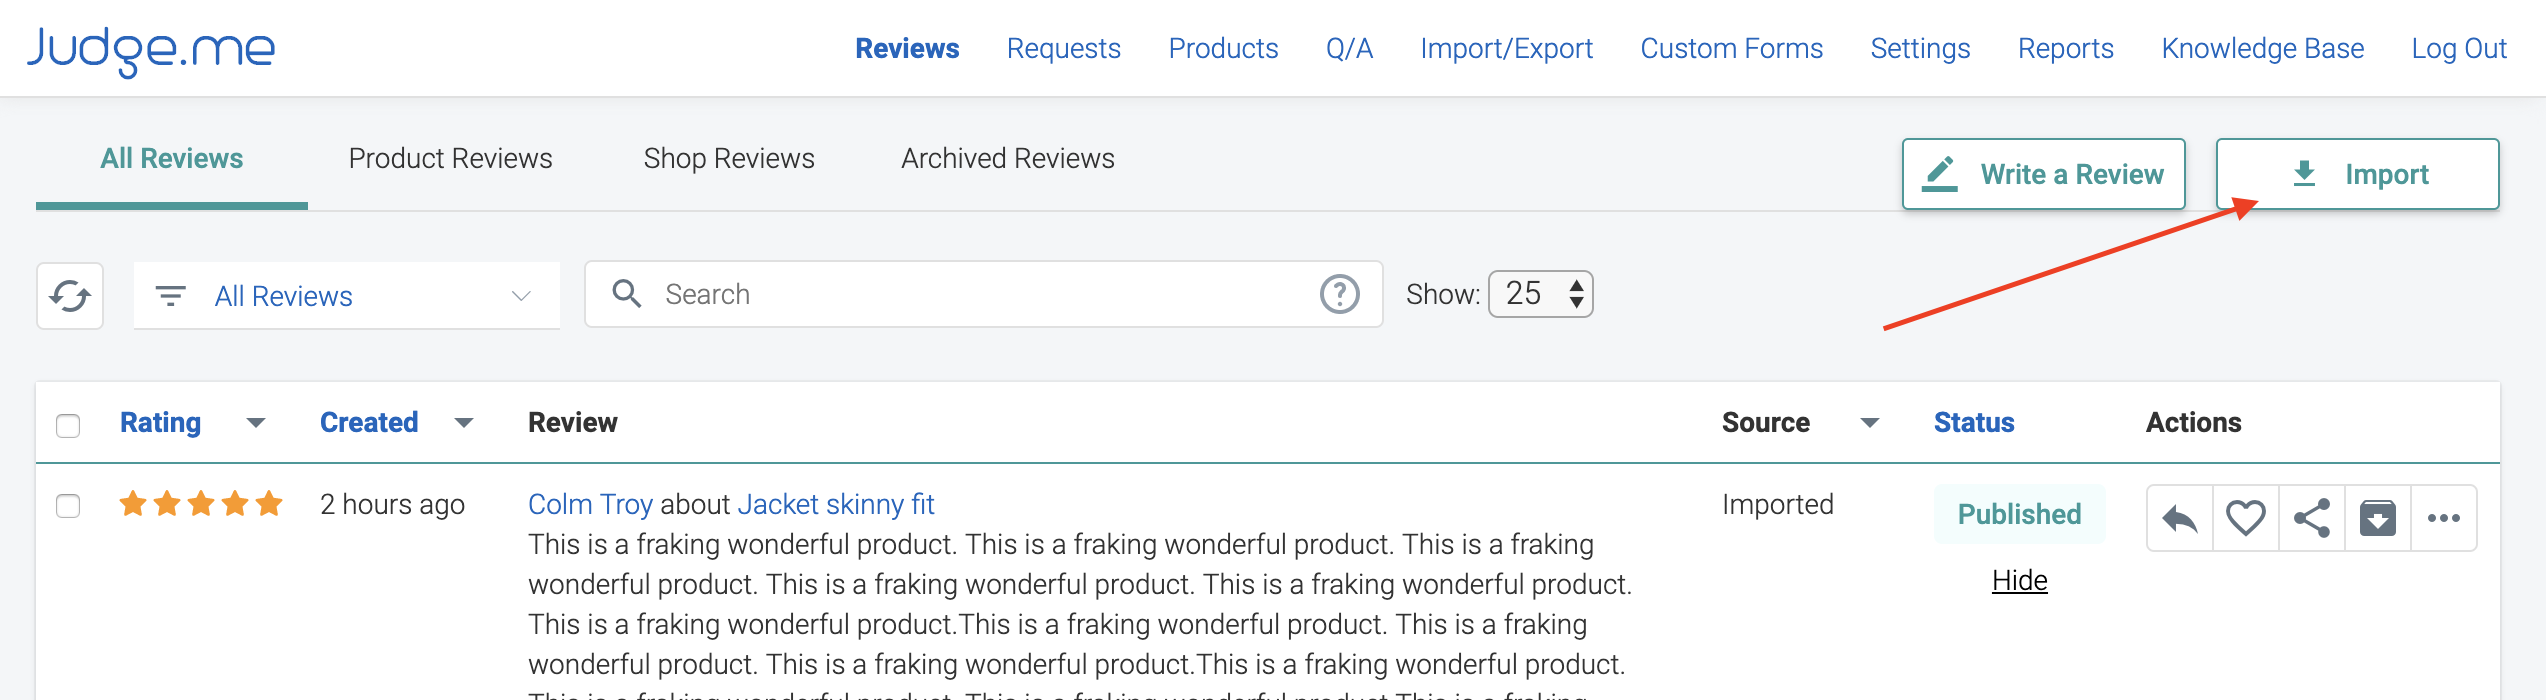 Reviews import